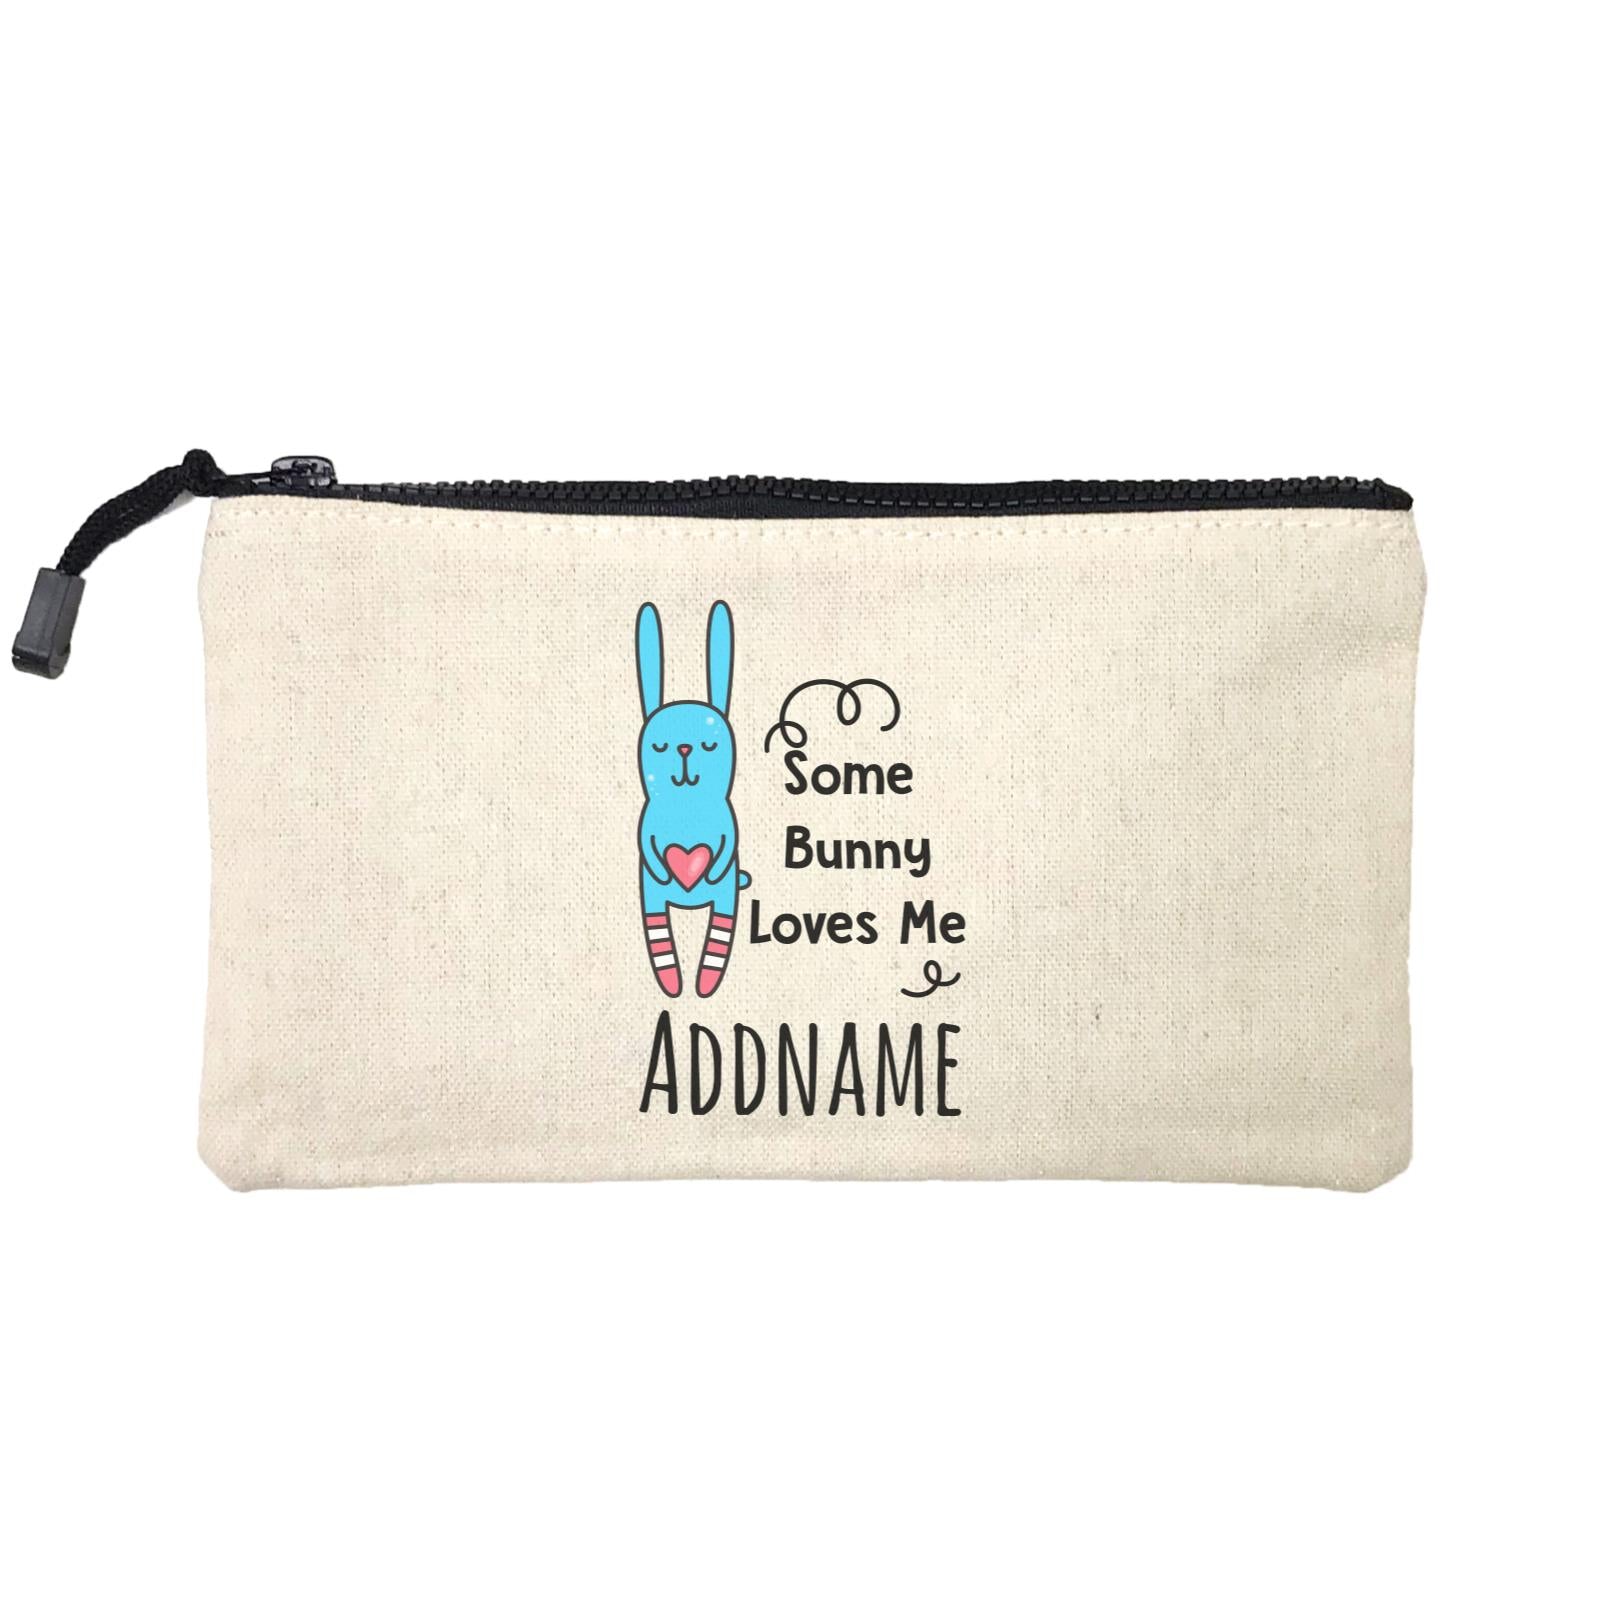 Drawn Baby Elements Some Bunny Loves Me Addname Mini Accessories Stationery Pouch